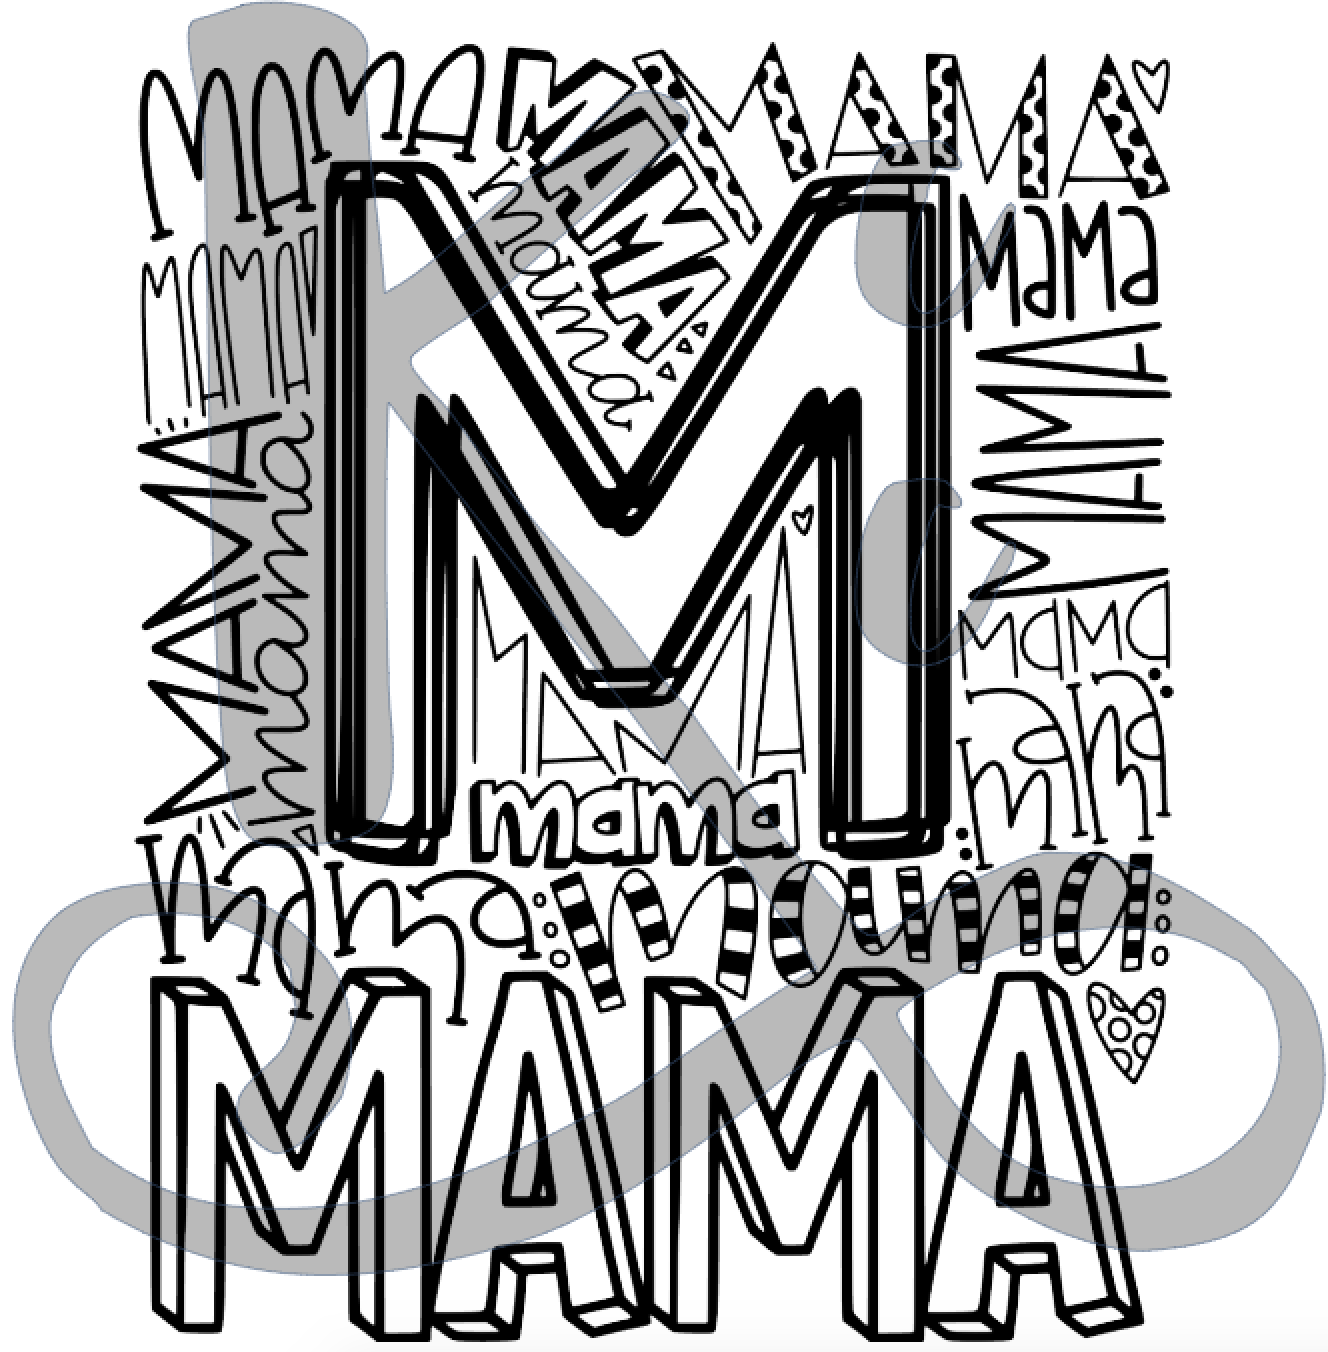 Mama (Word Collage)